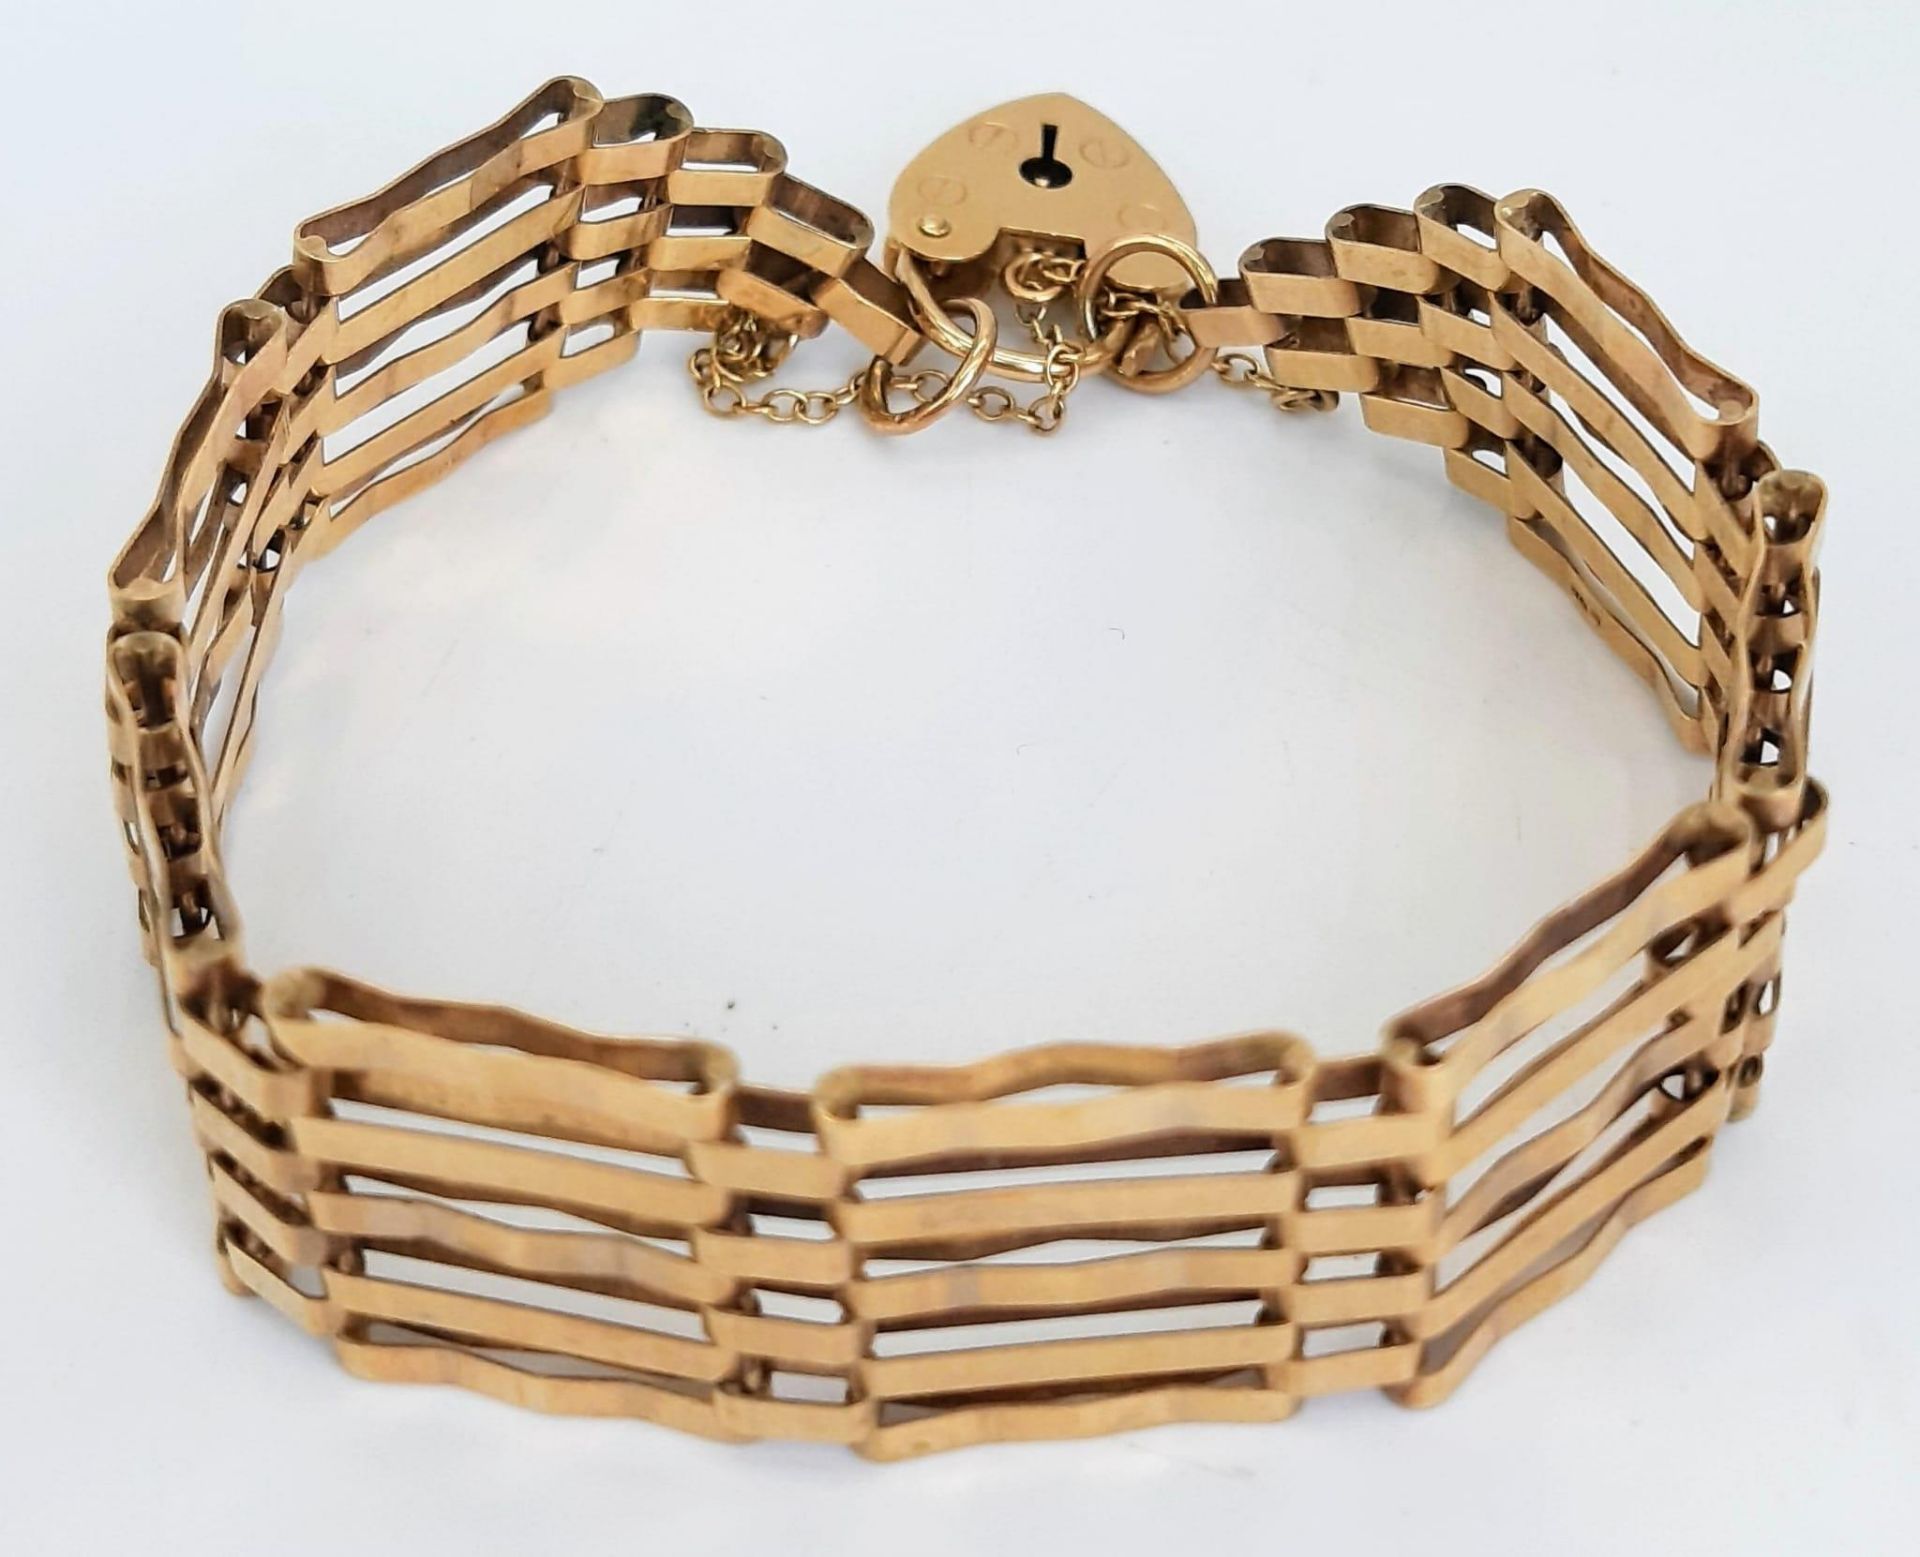 A Vintage 9K Yellow Gold Gate Bracelet with Heart Clasp. 16cm. 11.11g weight. - Image 2 of 4